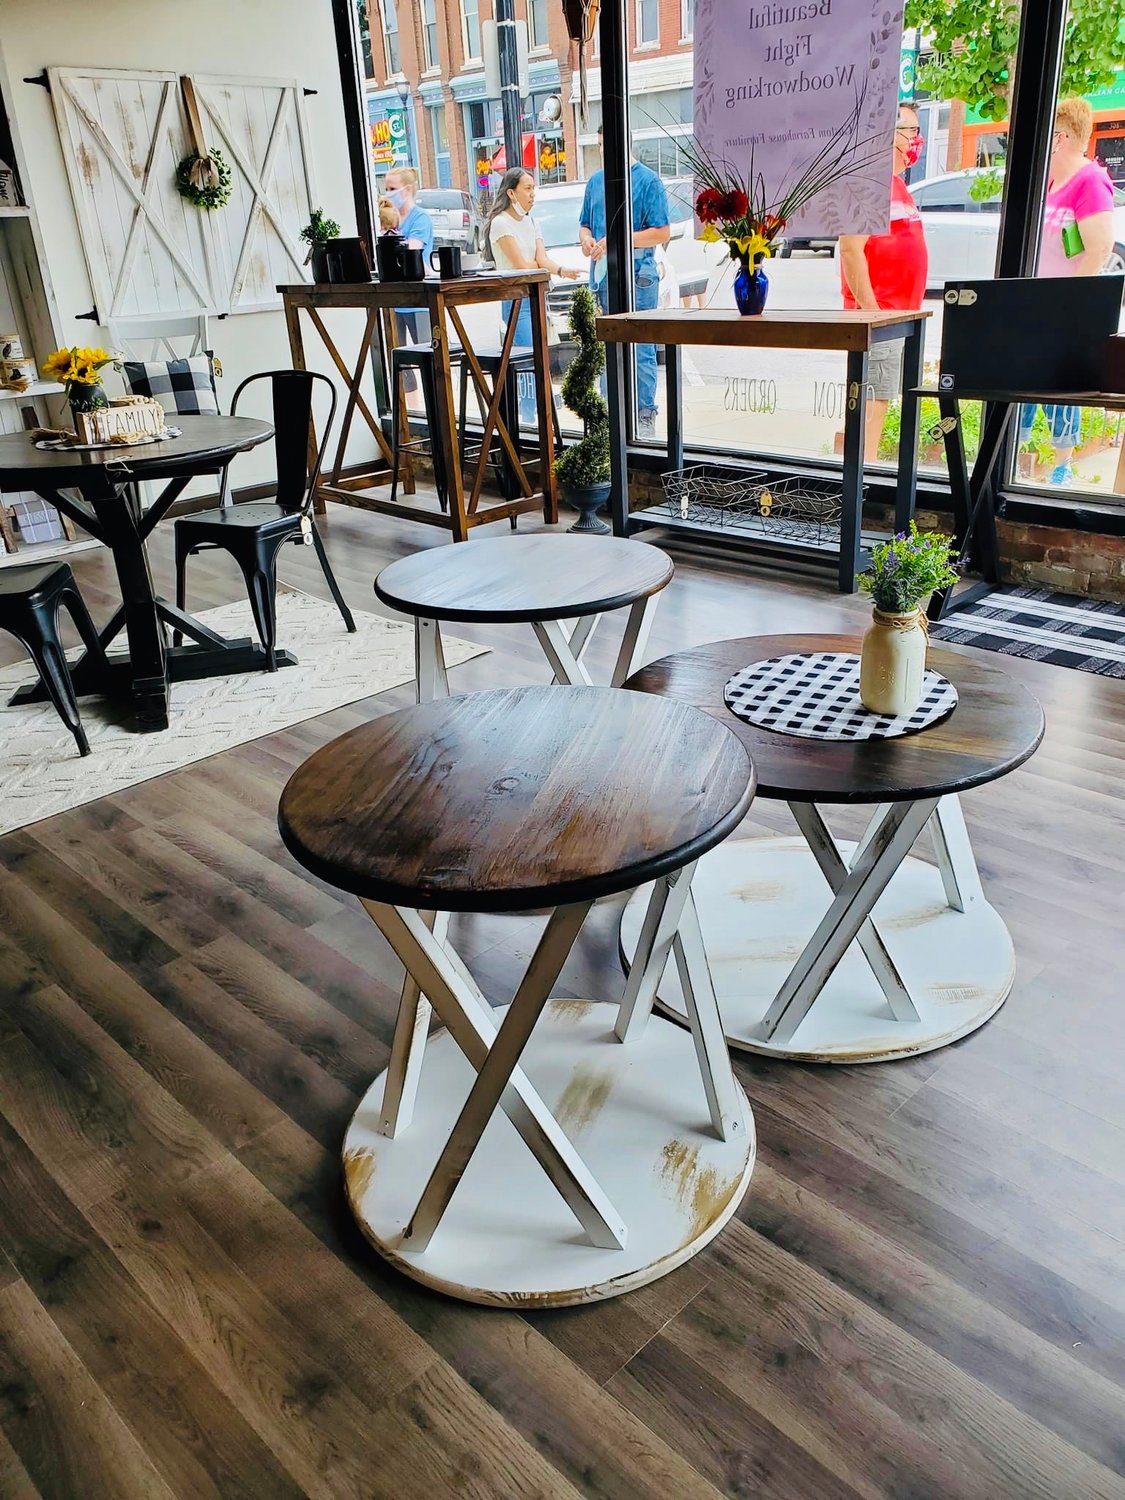 The shop focuses on custom farmhouse-style furniture and home decor items, such as coffee tables, benches and shelving.